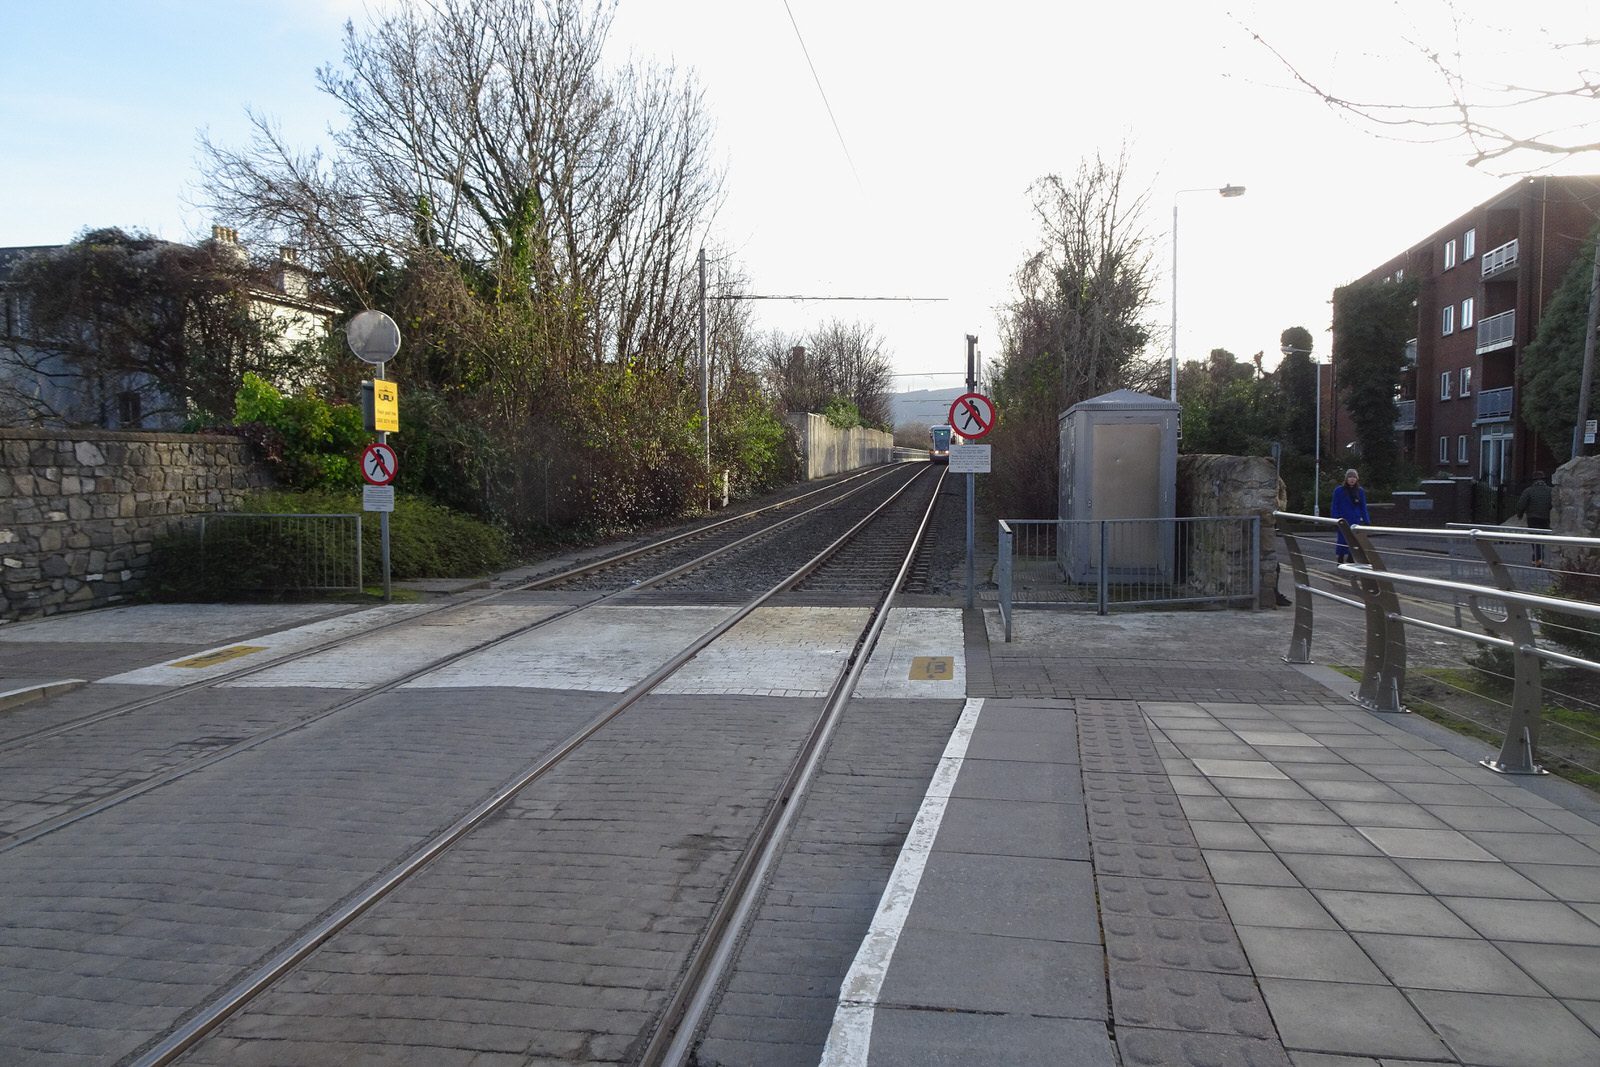 THE MILLTOWN LUAS TRAM STOP A FEW DAYS BEFORE CHRISTMAS DAY [AND NEARBY]-226270-1